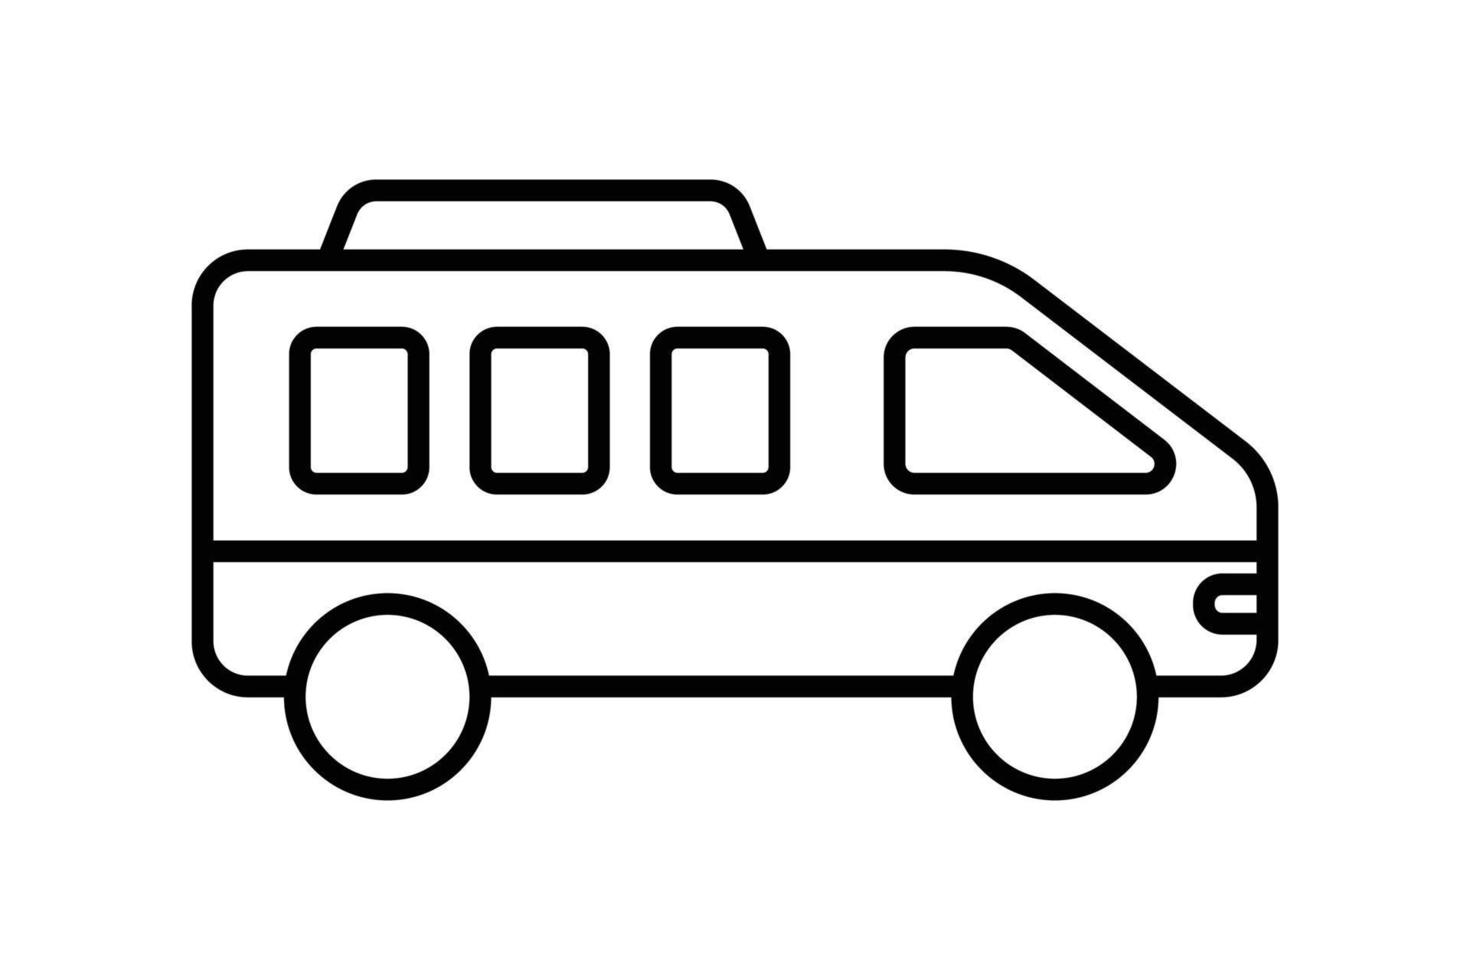 Tour bus icon illustration. icon related to transportation, tourism, travel. Line icon style. Simple vector design editable